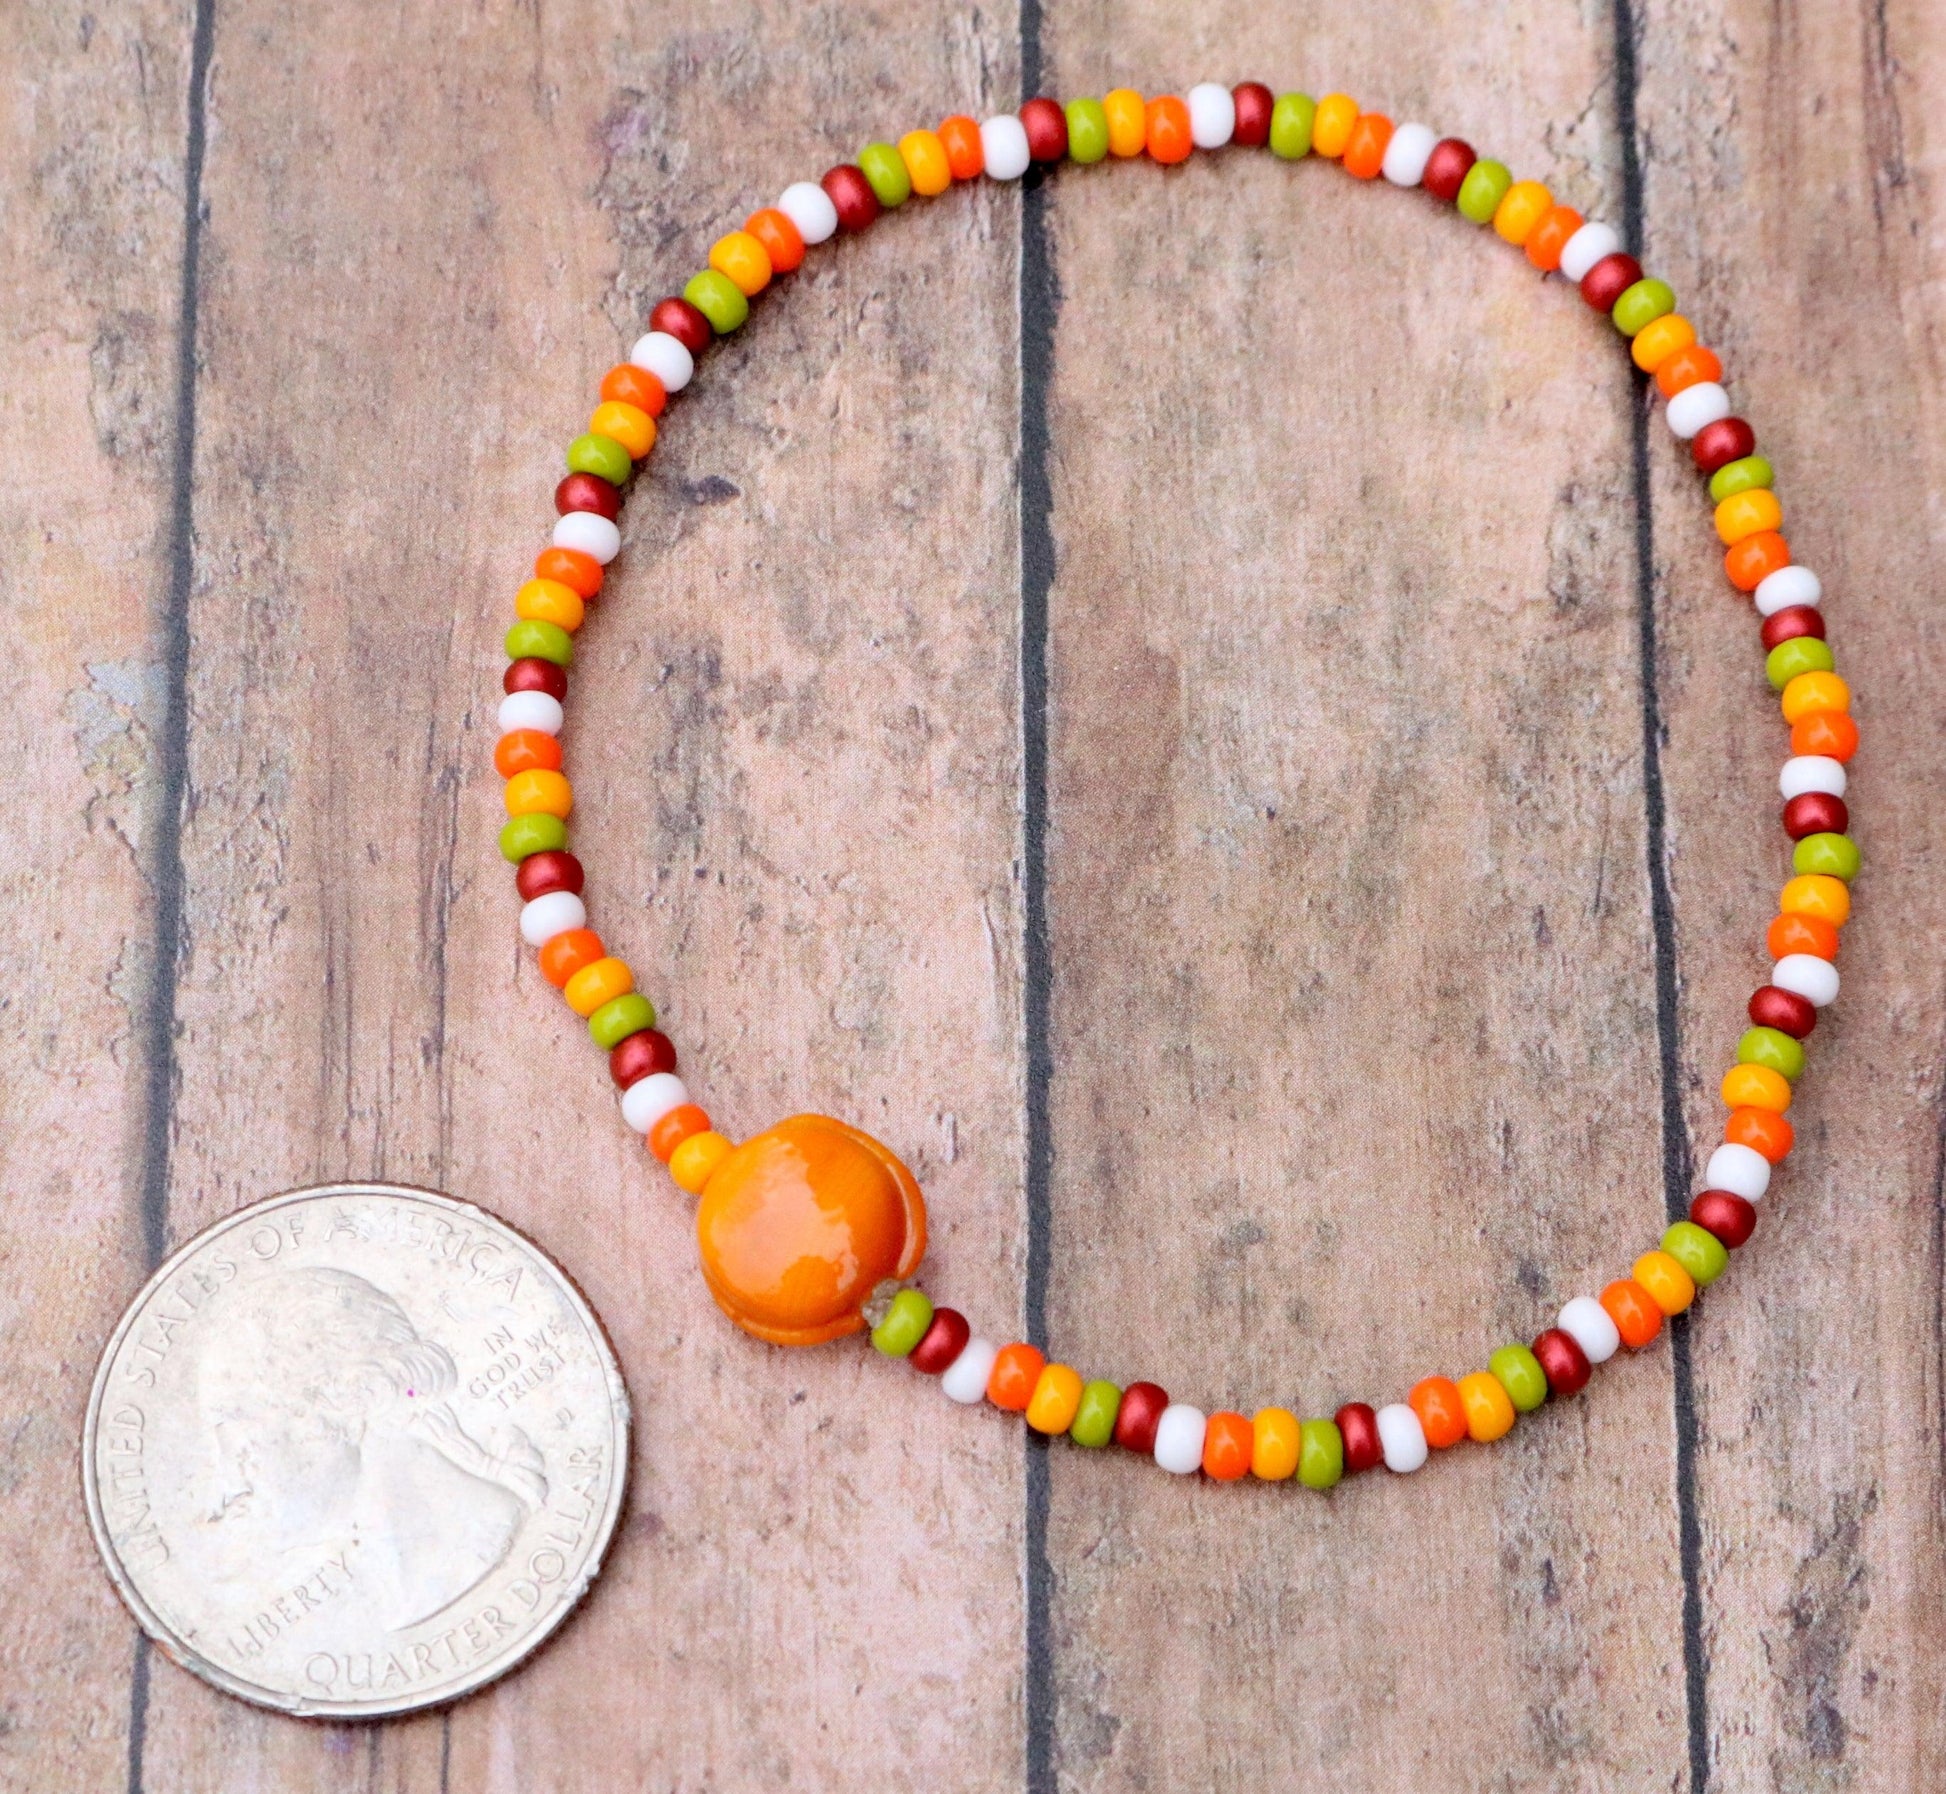 Fall in Love with A Glass Orange Sun - Red, Yellow, Green, and White Glass Bracelet Coin Size Overview